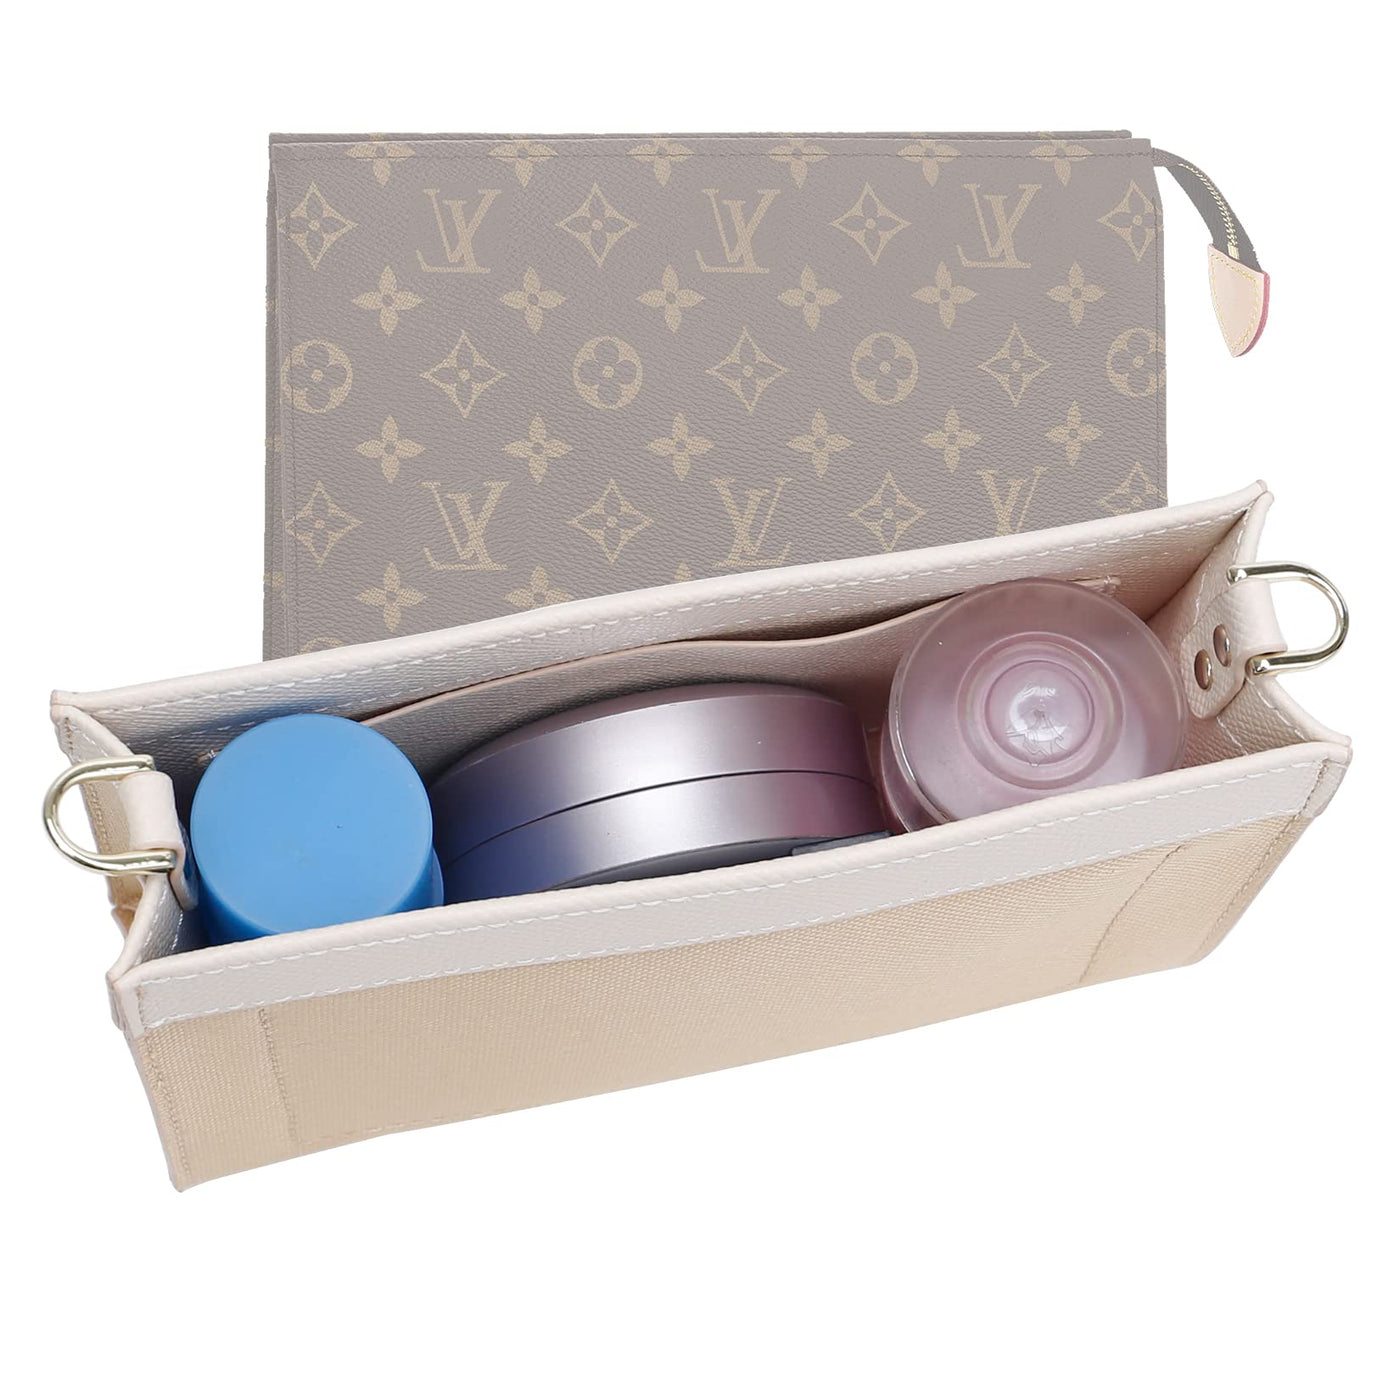 lv daily pouch organizer with hooks